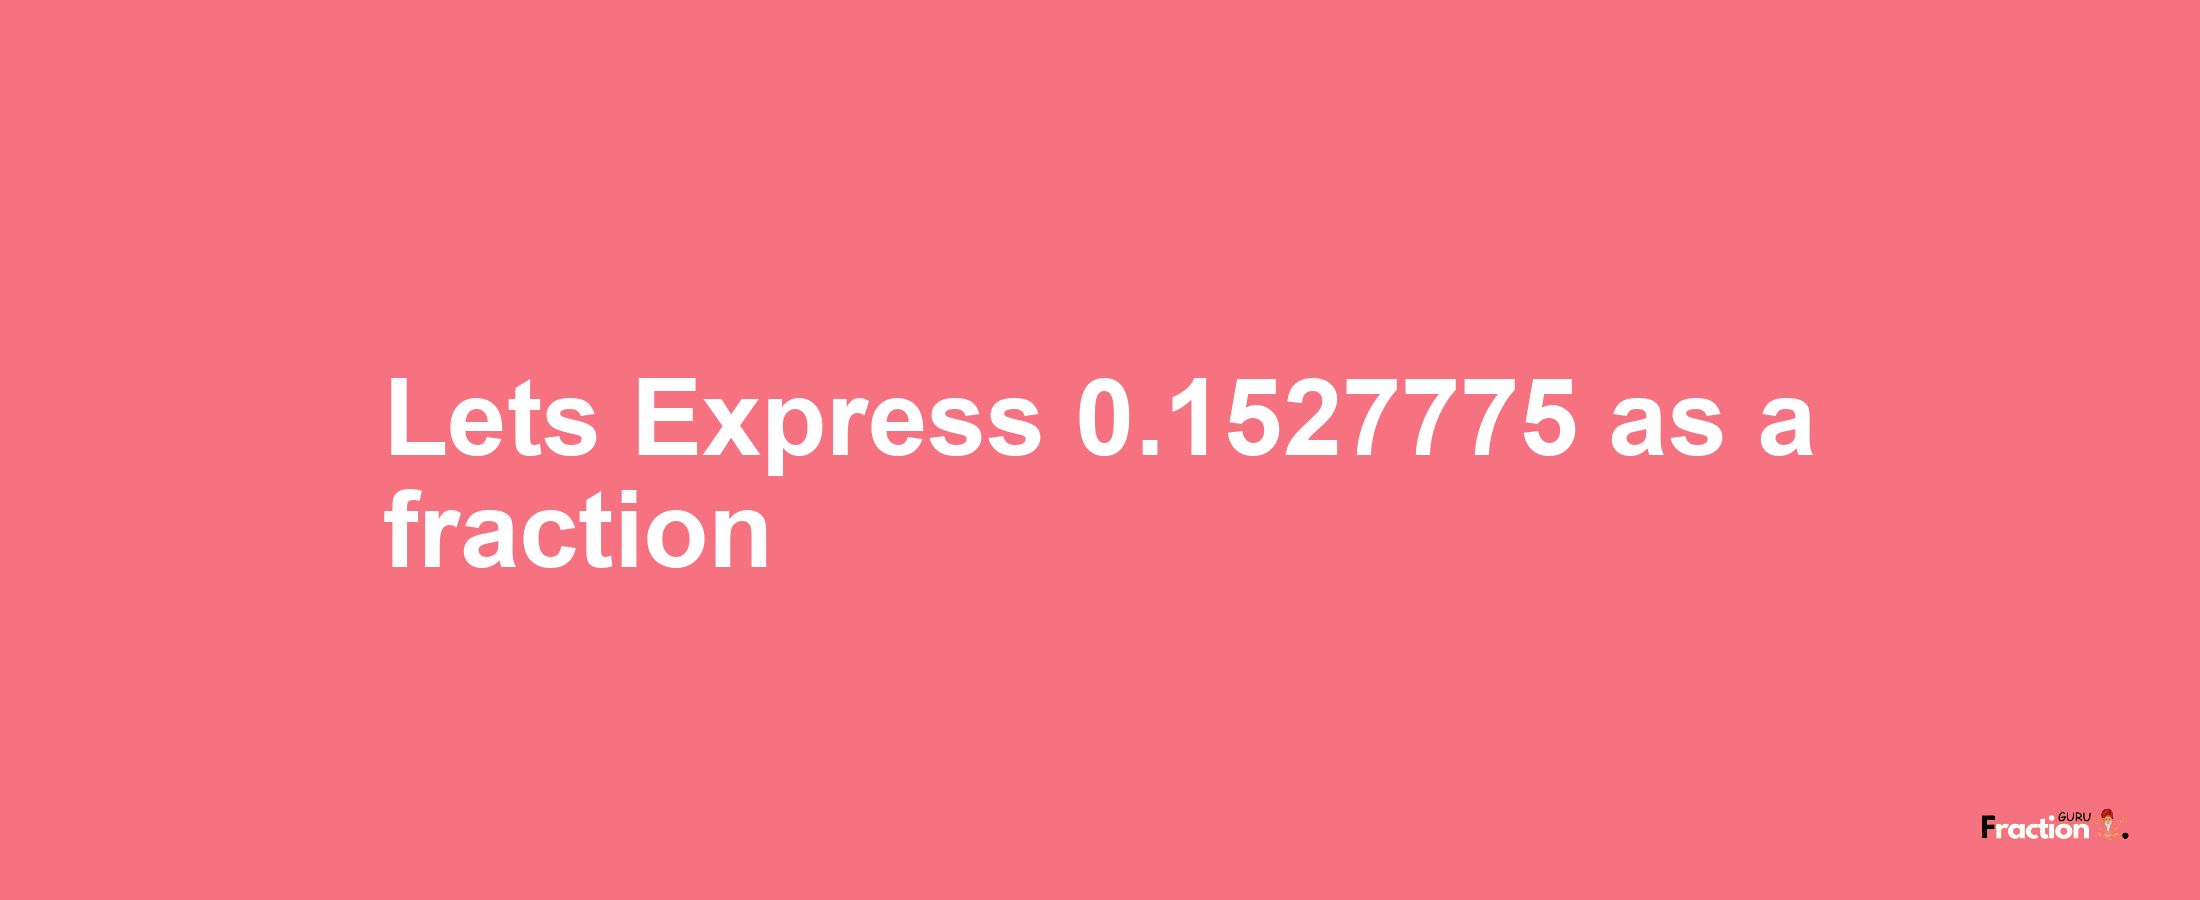 Lets Express 0.1527775 as afraction